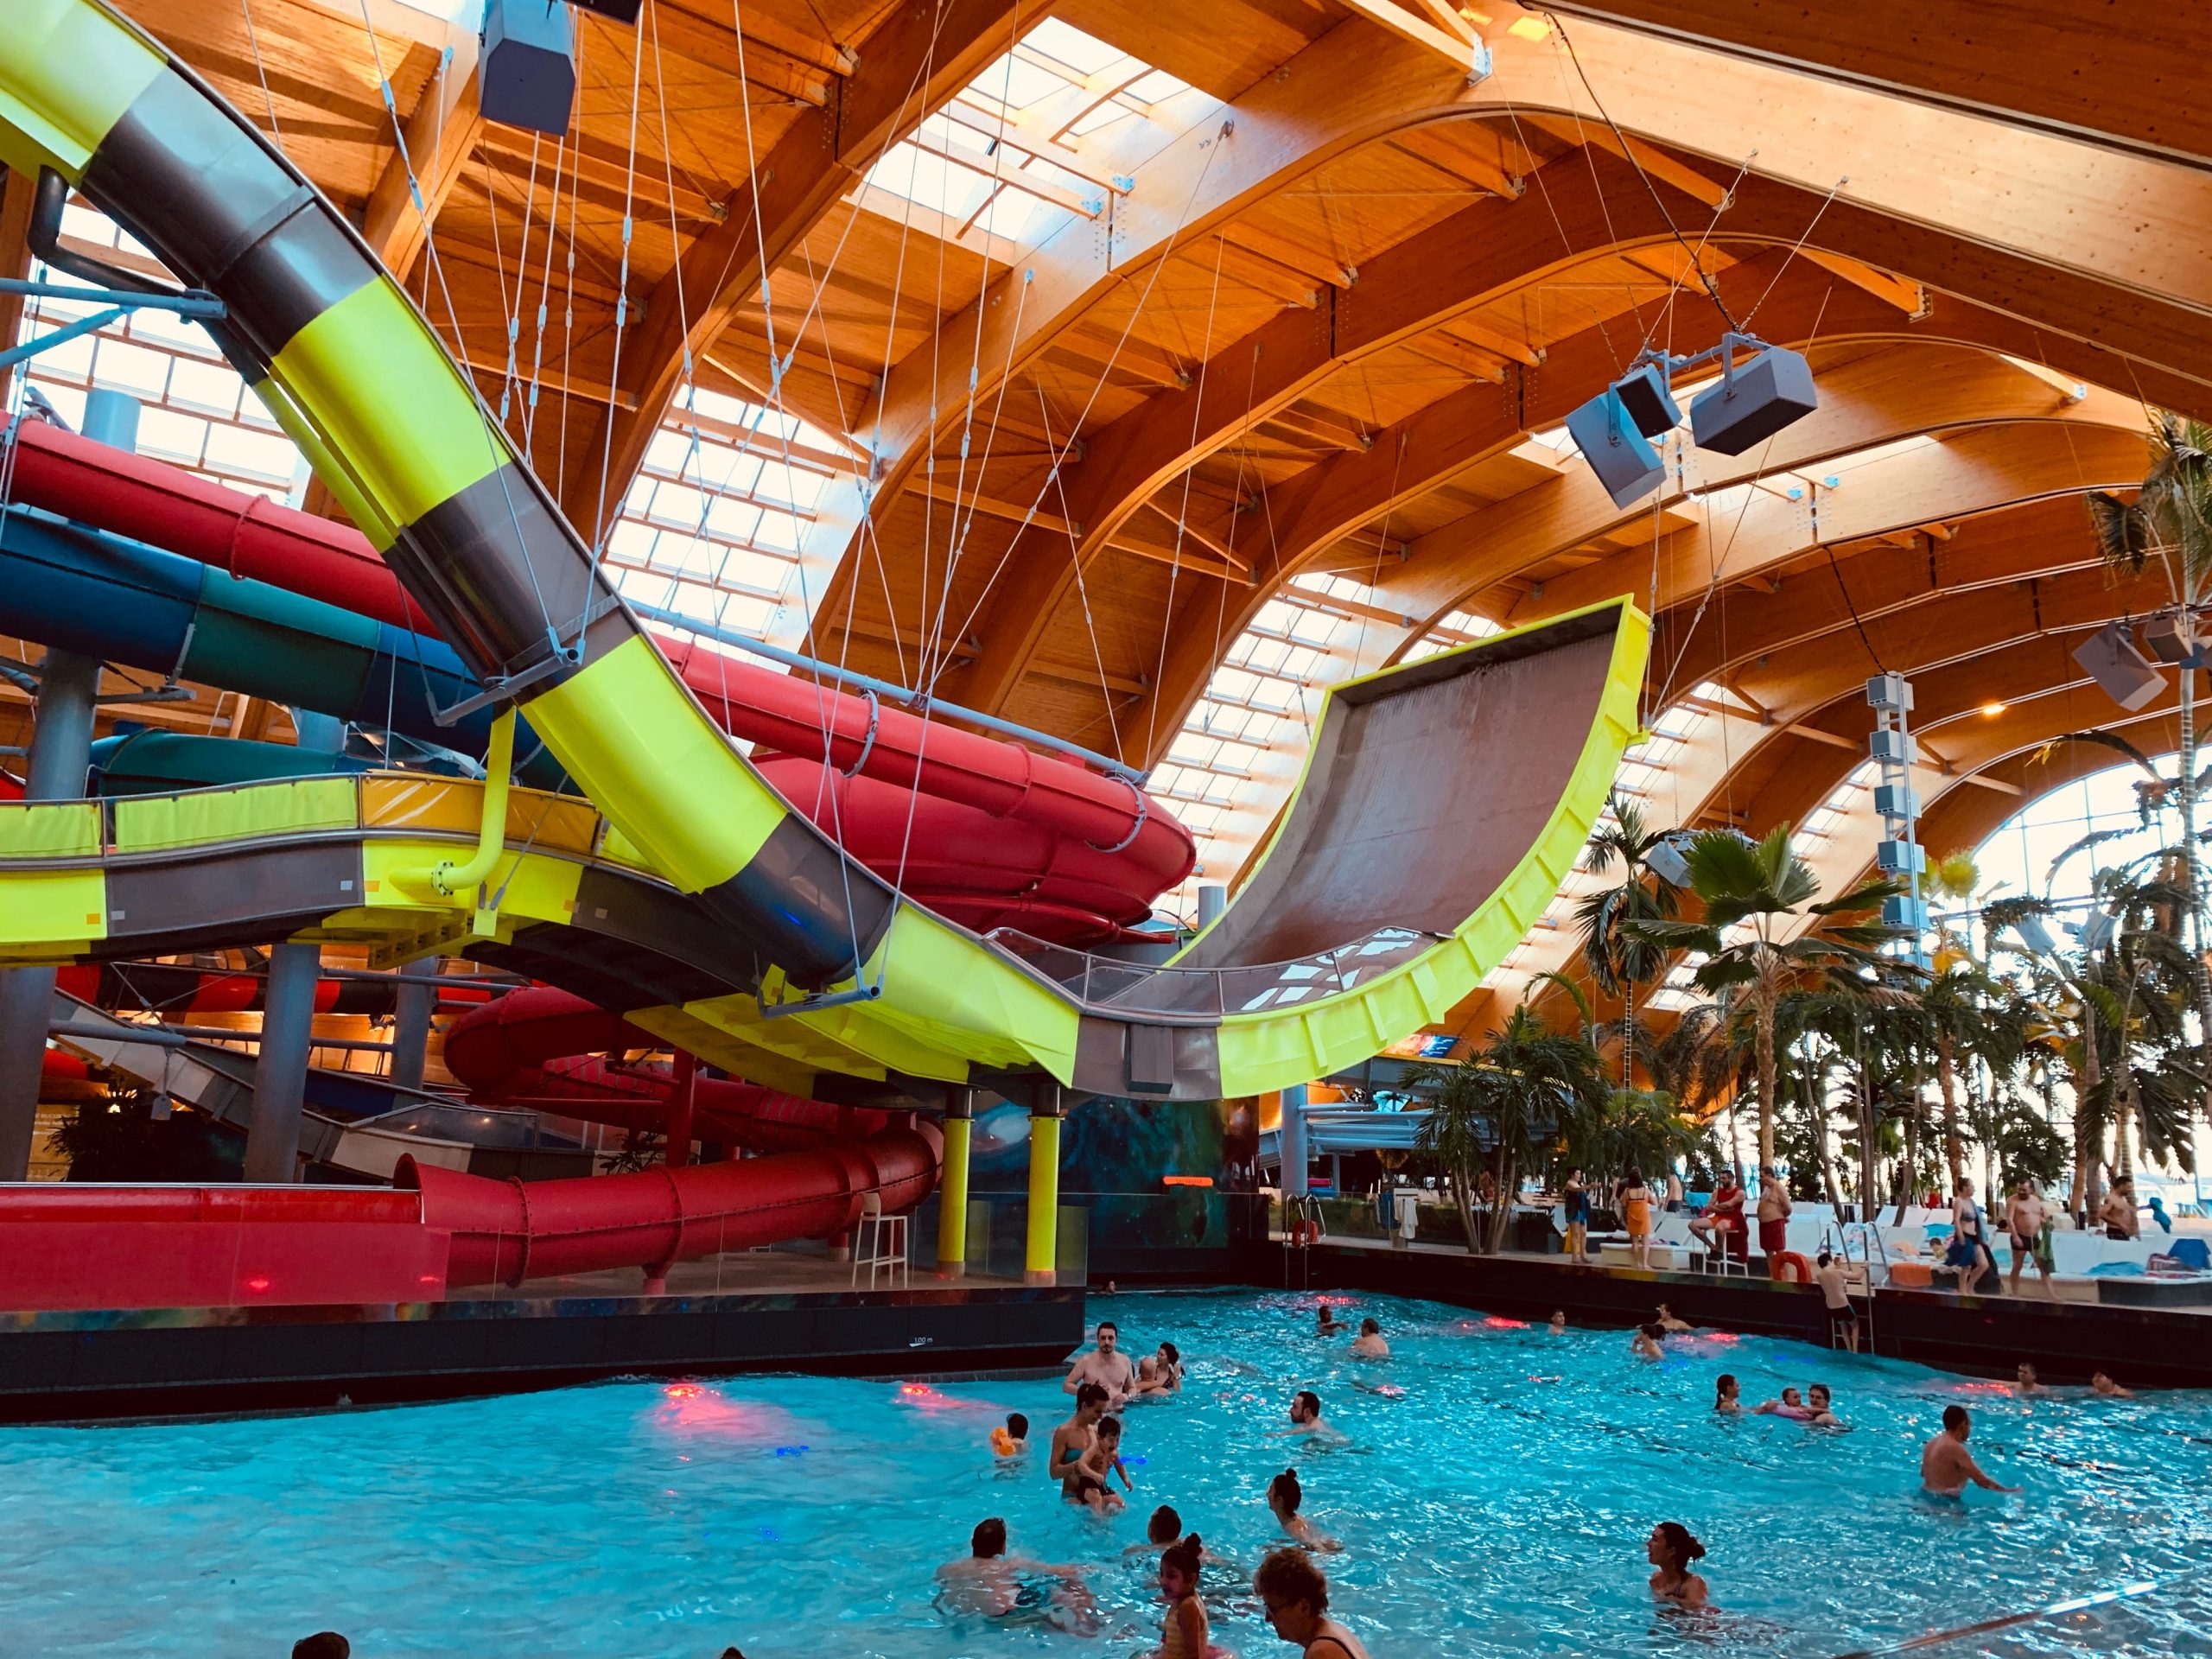 People in pool at indoor waterpark with water slides above them